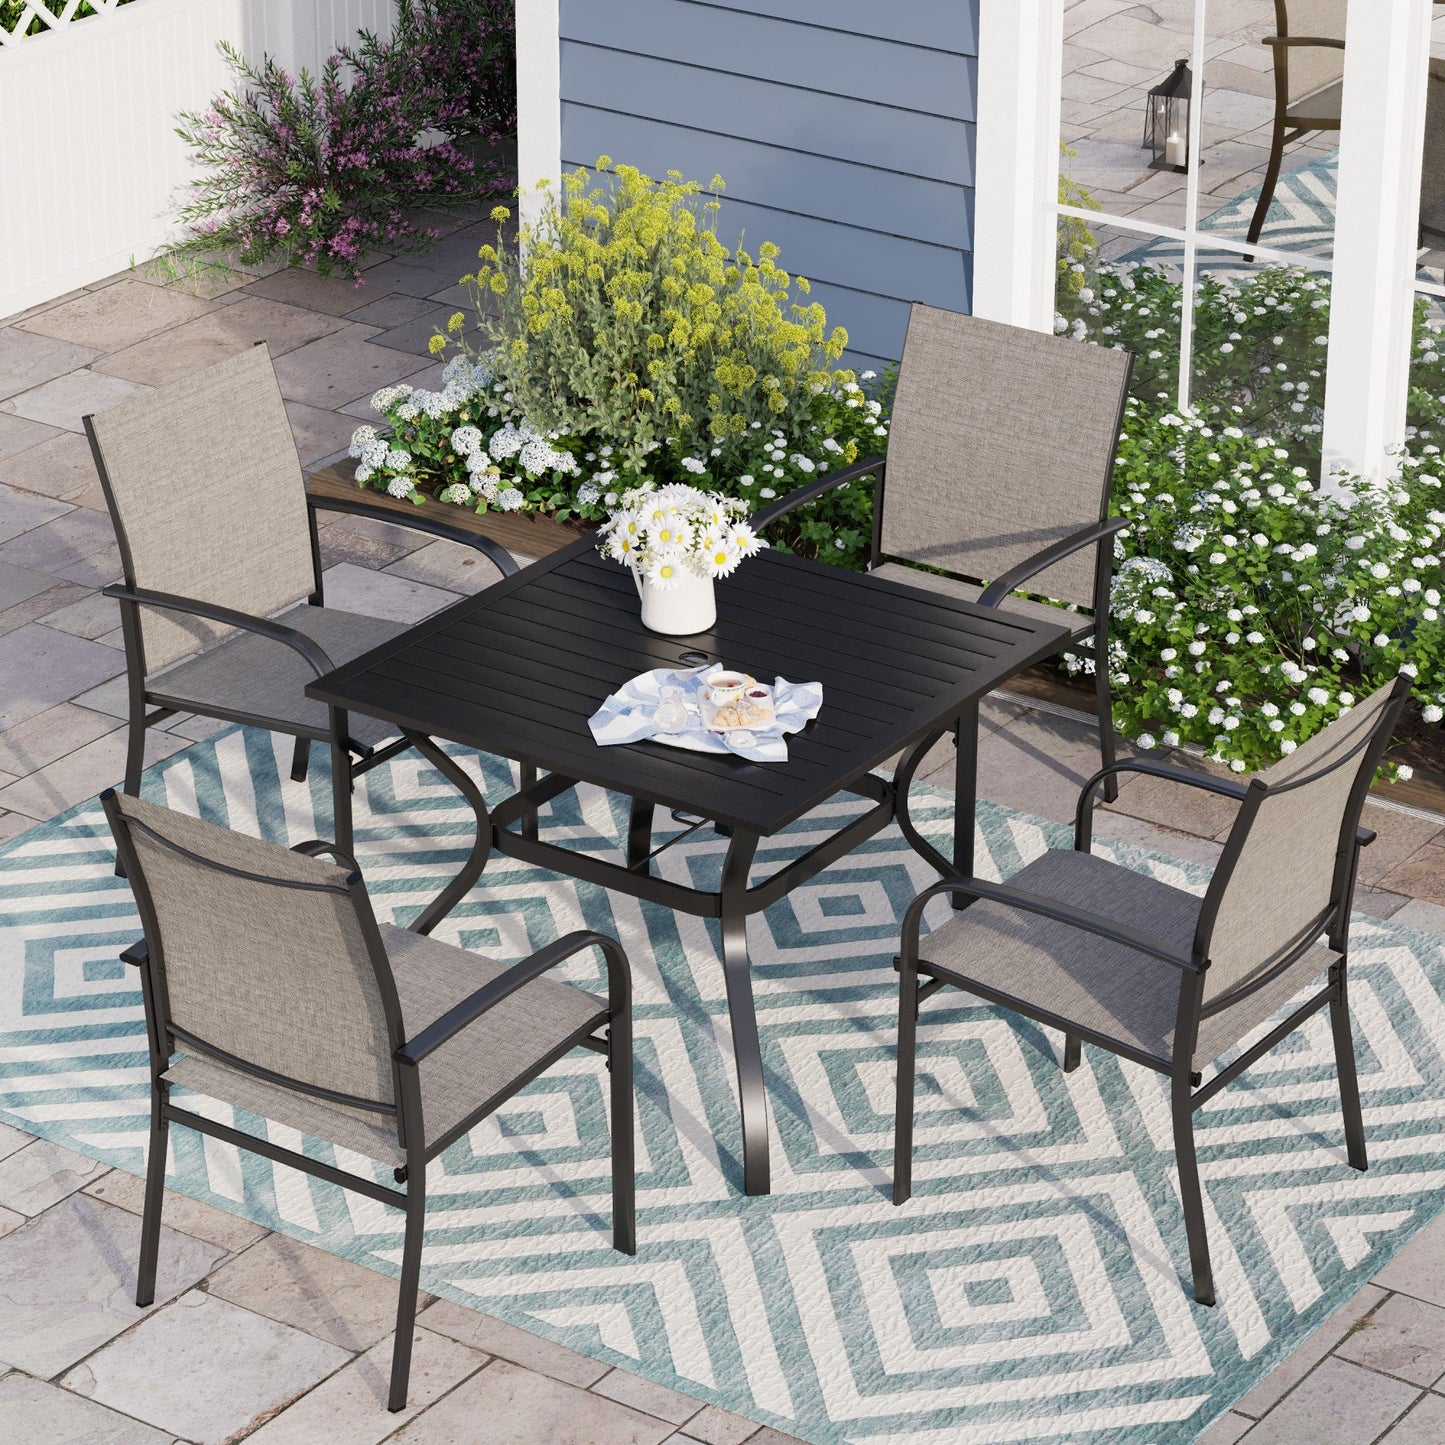 Sophia & William 5 Piece Patio Metal Dining Set Square Table and 4 Brown Textilene Chairs